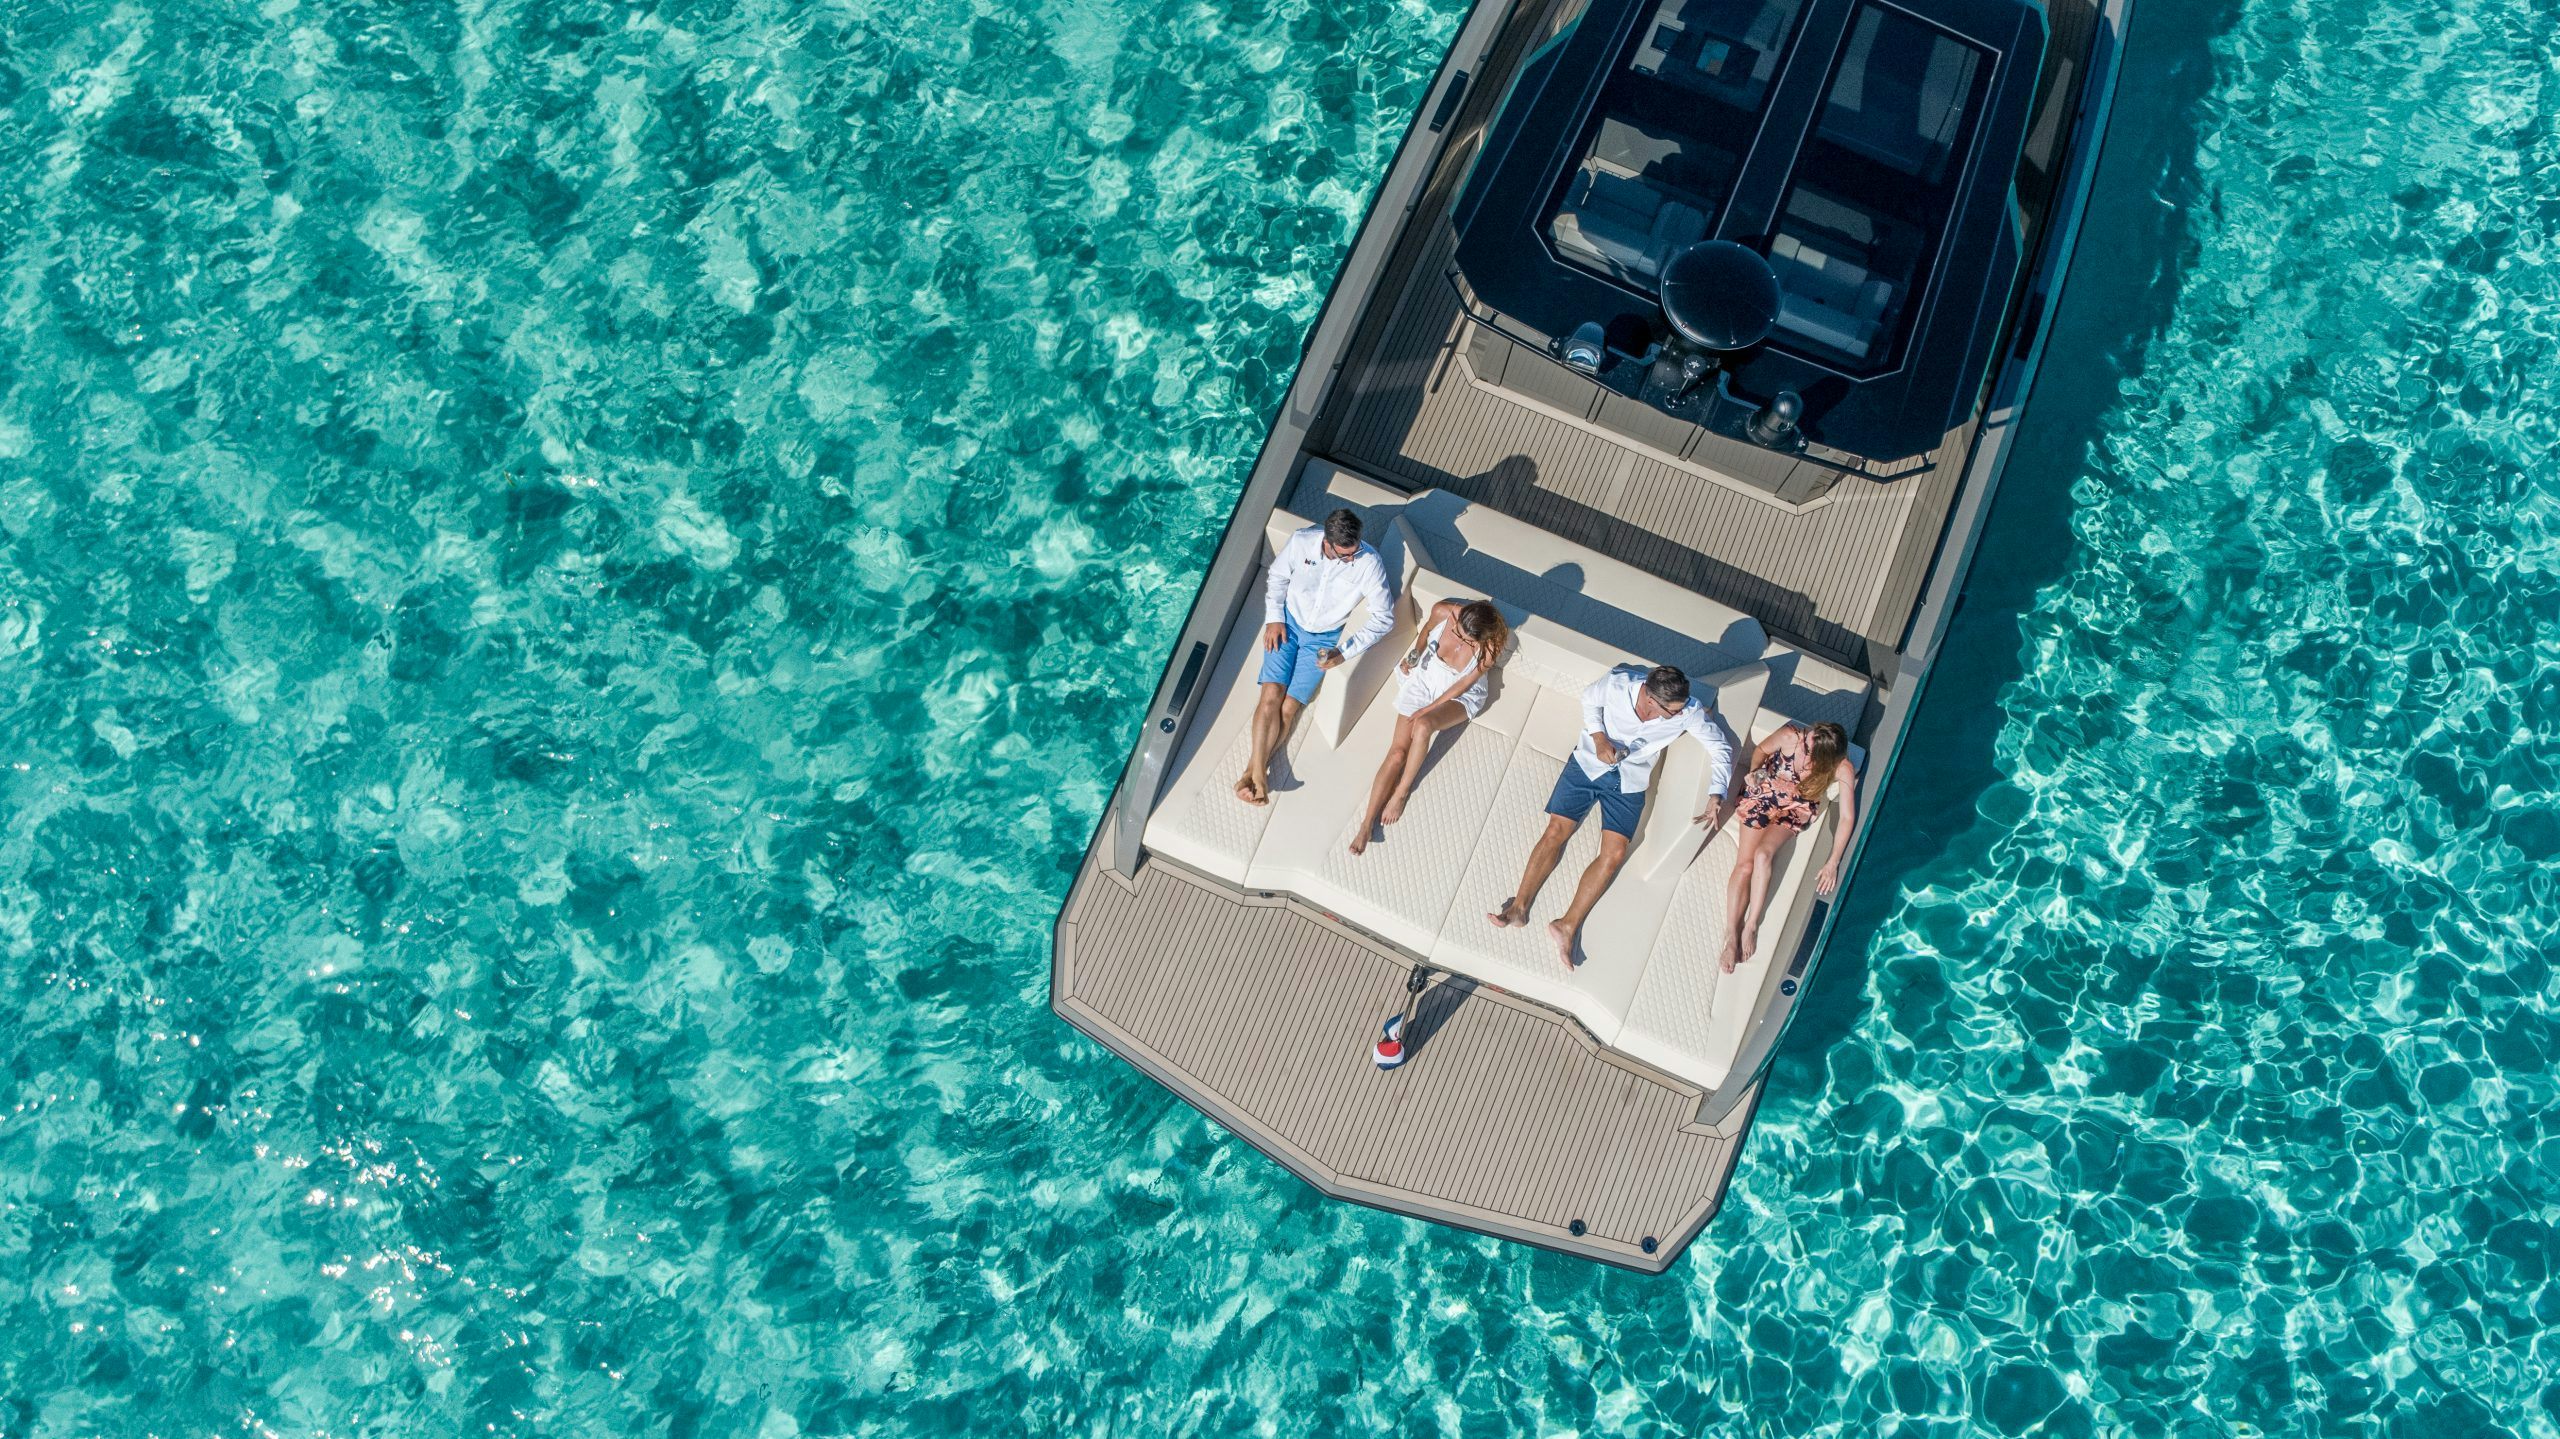 vanquish exterior aerial view people relaxing on the yacht